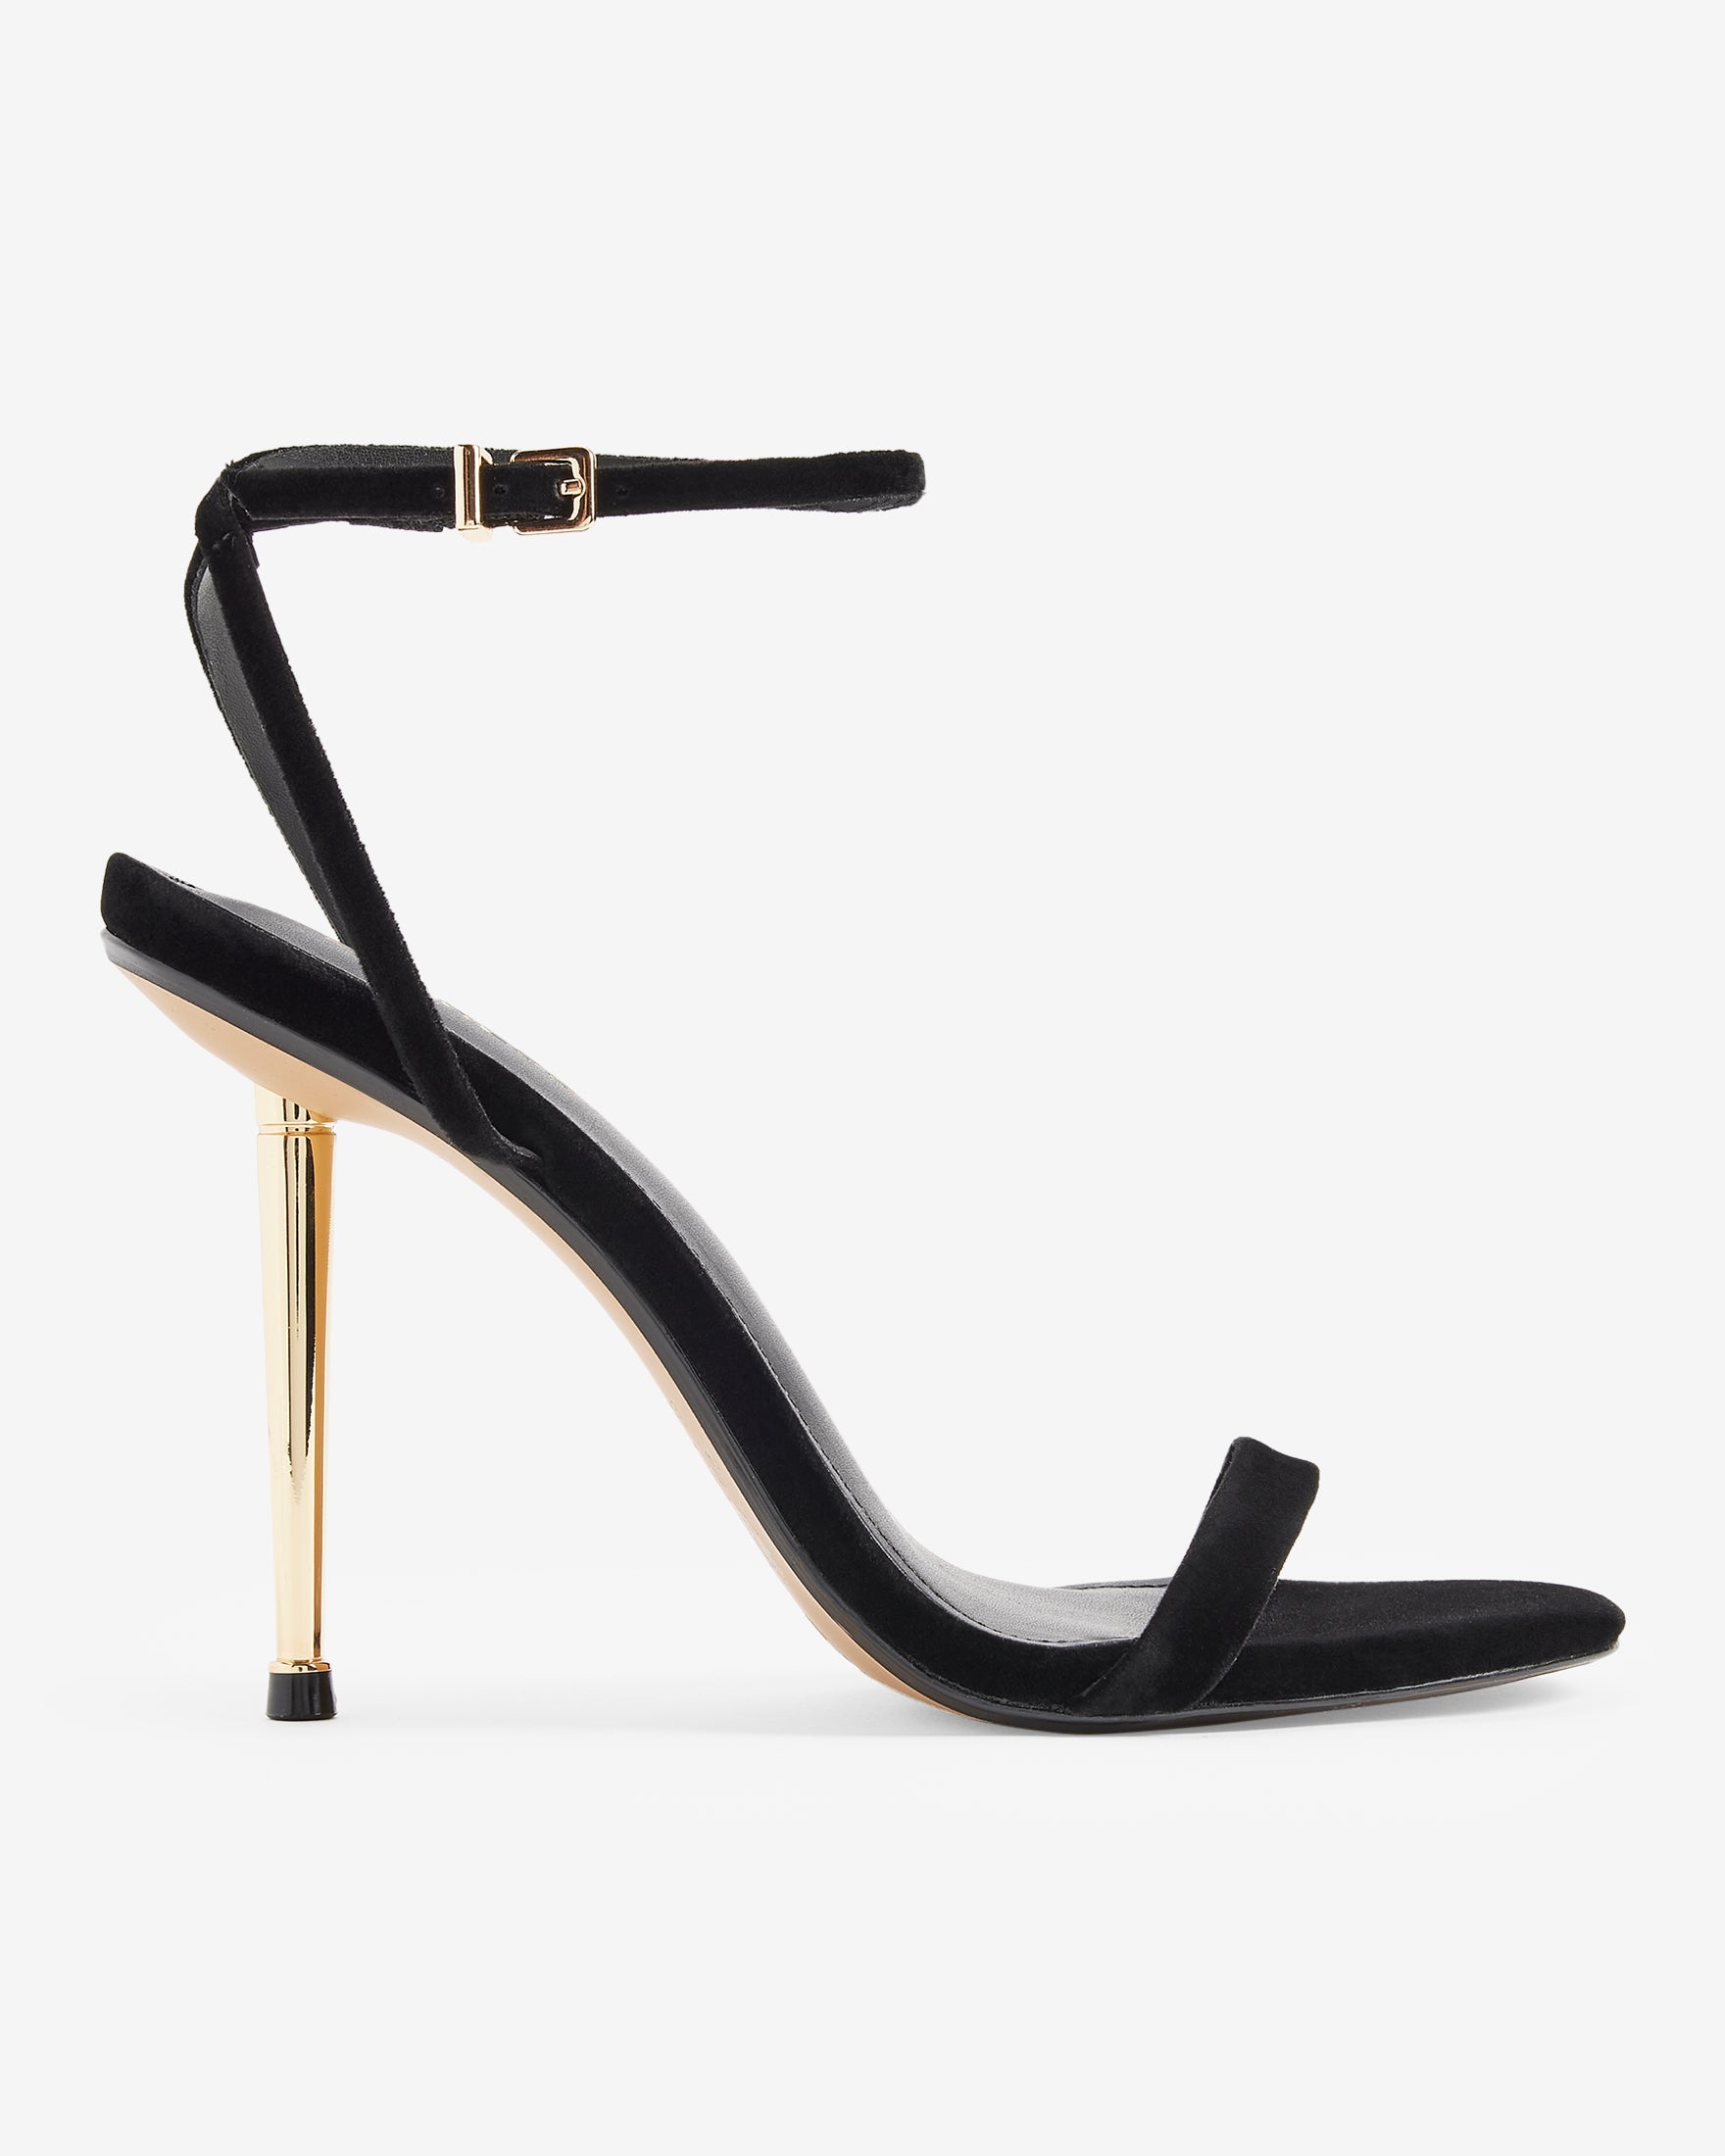 Black strappy open-toe shoes with thin gold heel